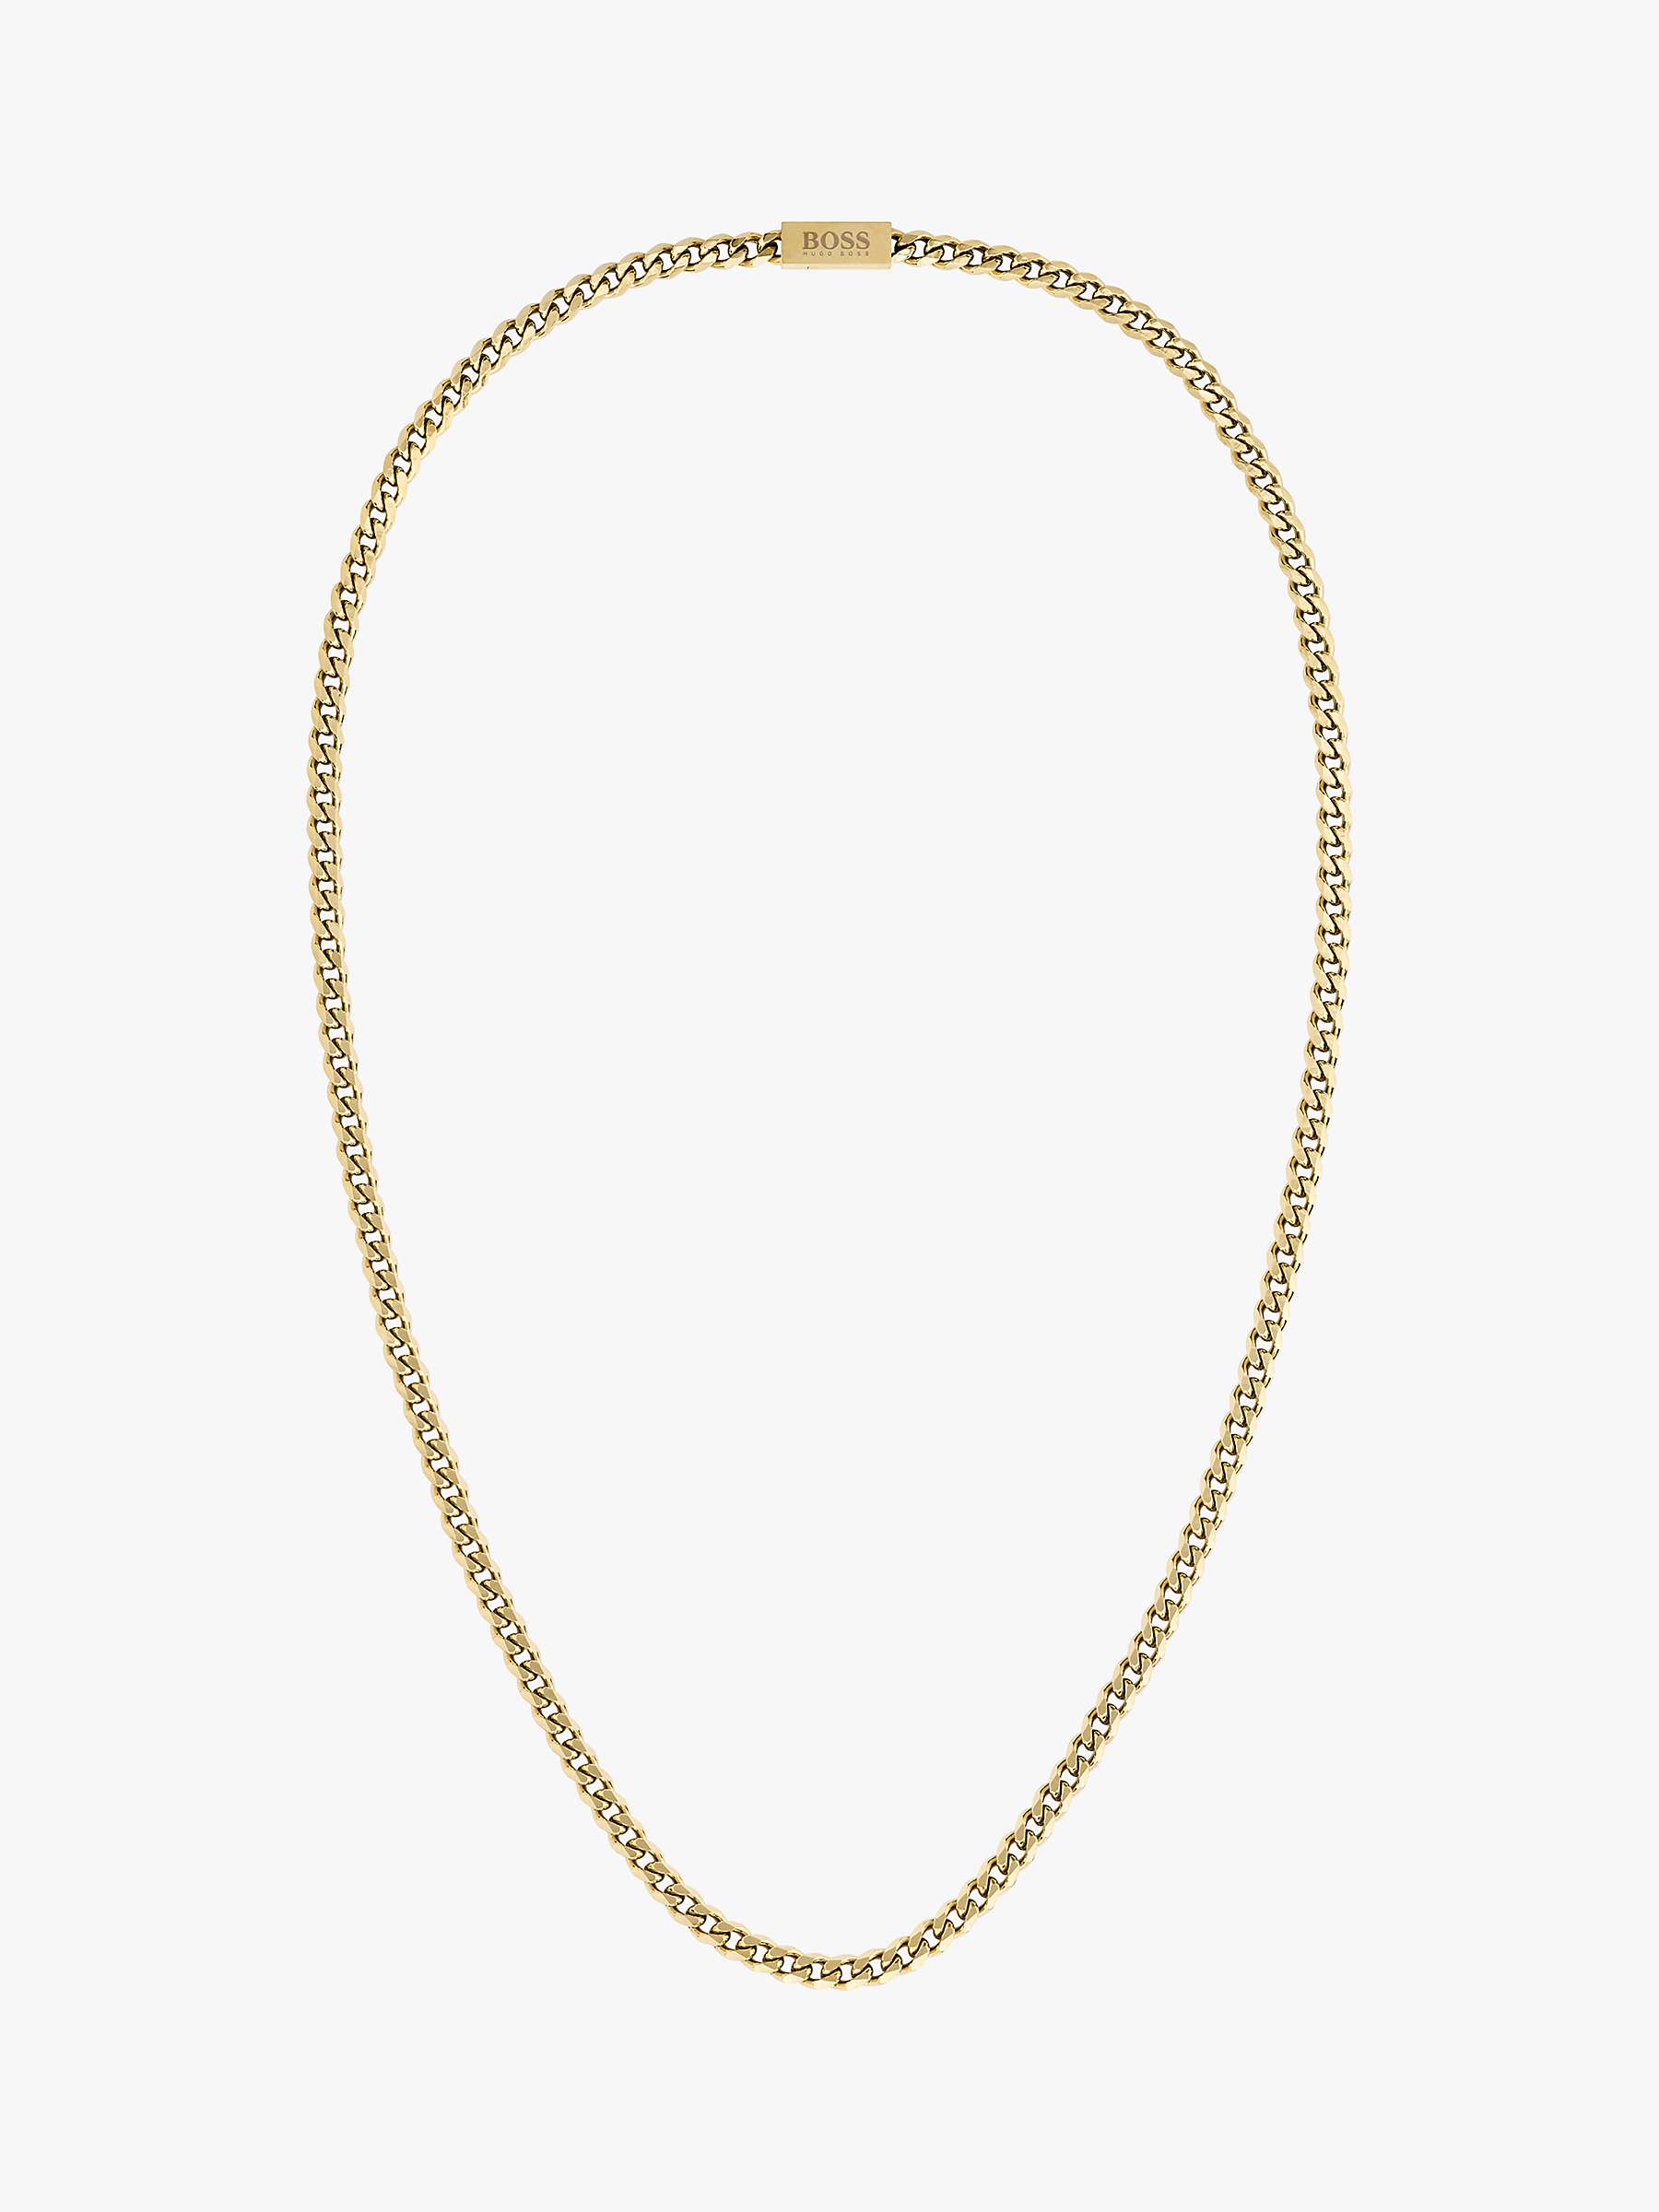 Buy BOSS Men's Him Collection Chain Necklace, Gold Online at johnlewis.com